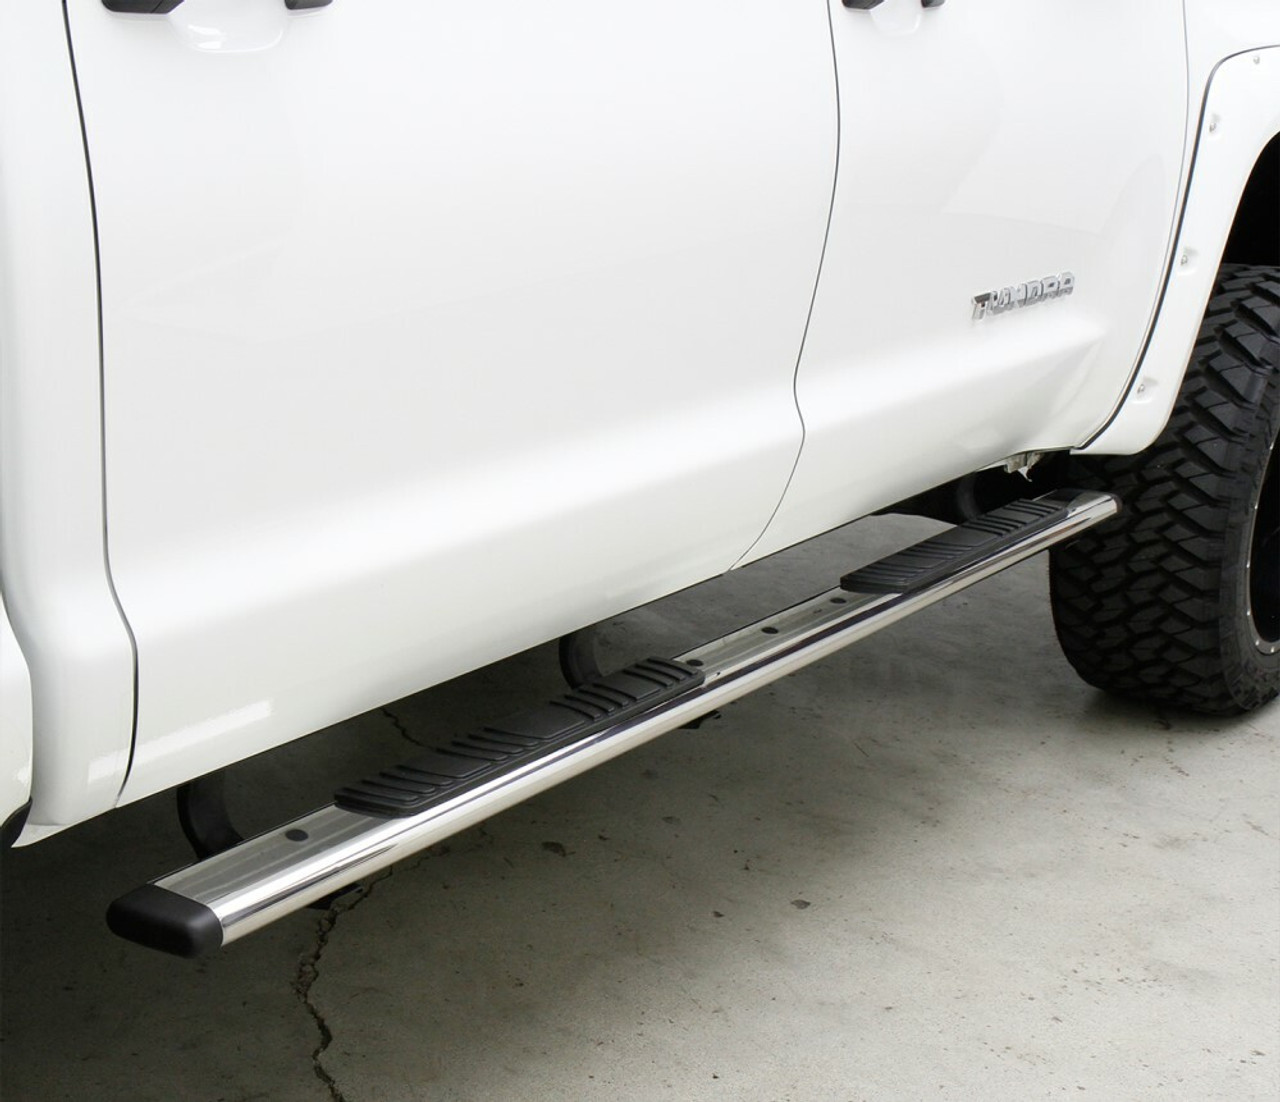 Go Rhino 685404552PS Chevrolet, Silverado 1500, 2007 - 2018, 5 inch OE Xtreme Low Profile - Complete Kit: Stainless steel, Polished, 650052PS side bars + 6840455 OE Xtreme Brackets. 5 inch wide x 52 inch long side bars. 3 Brackets per side